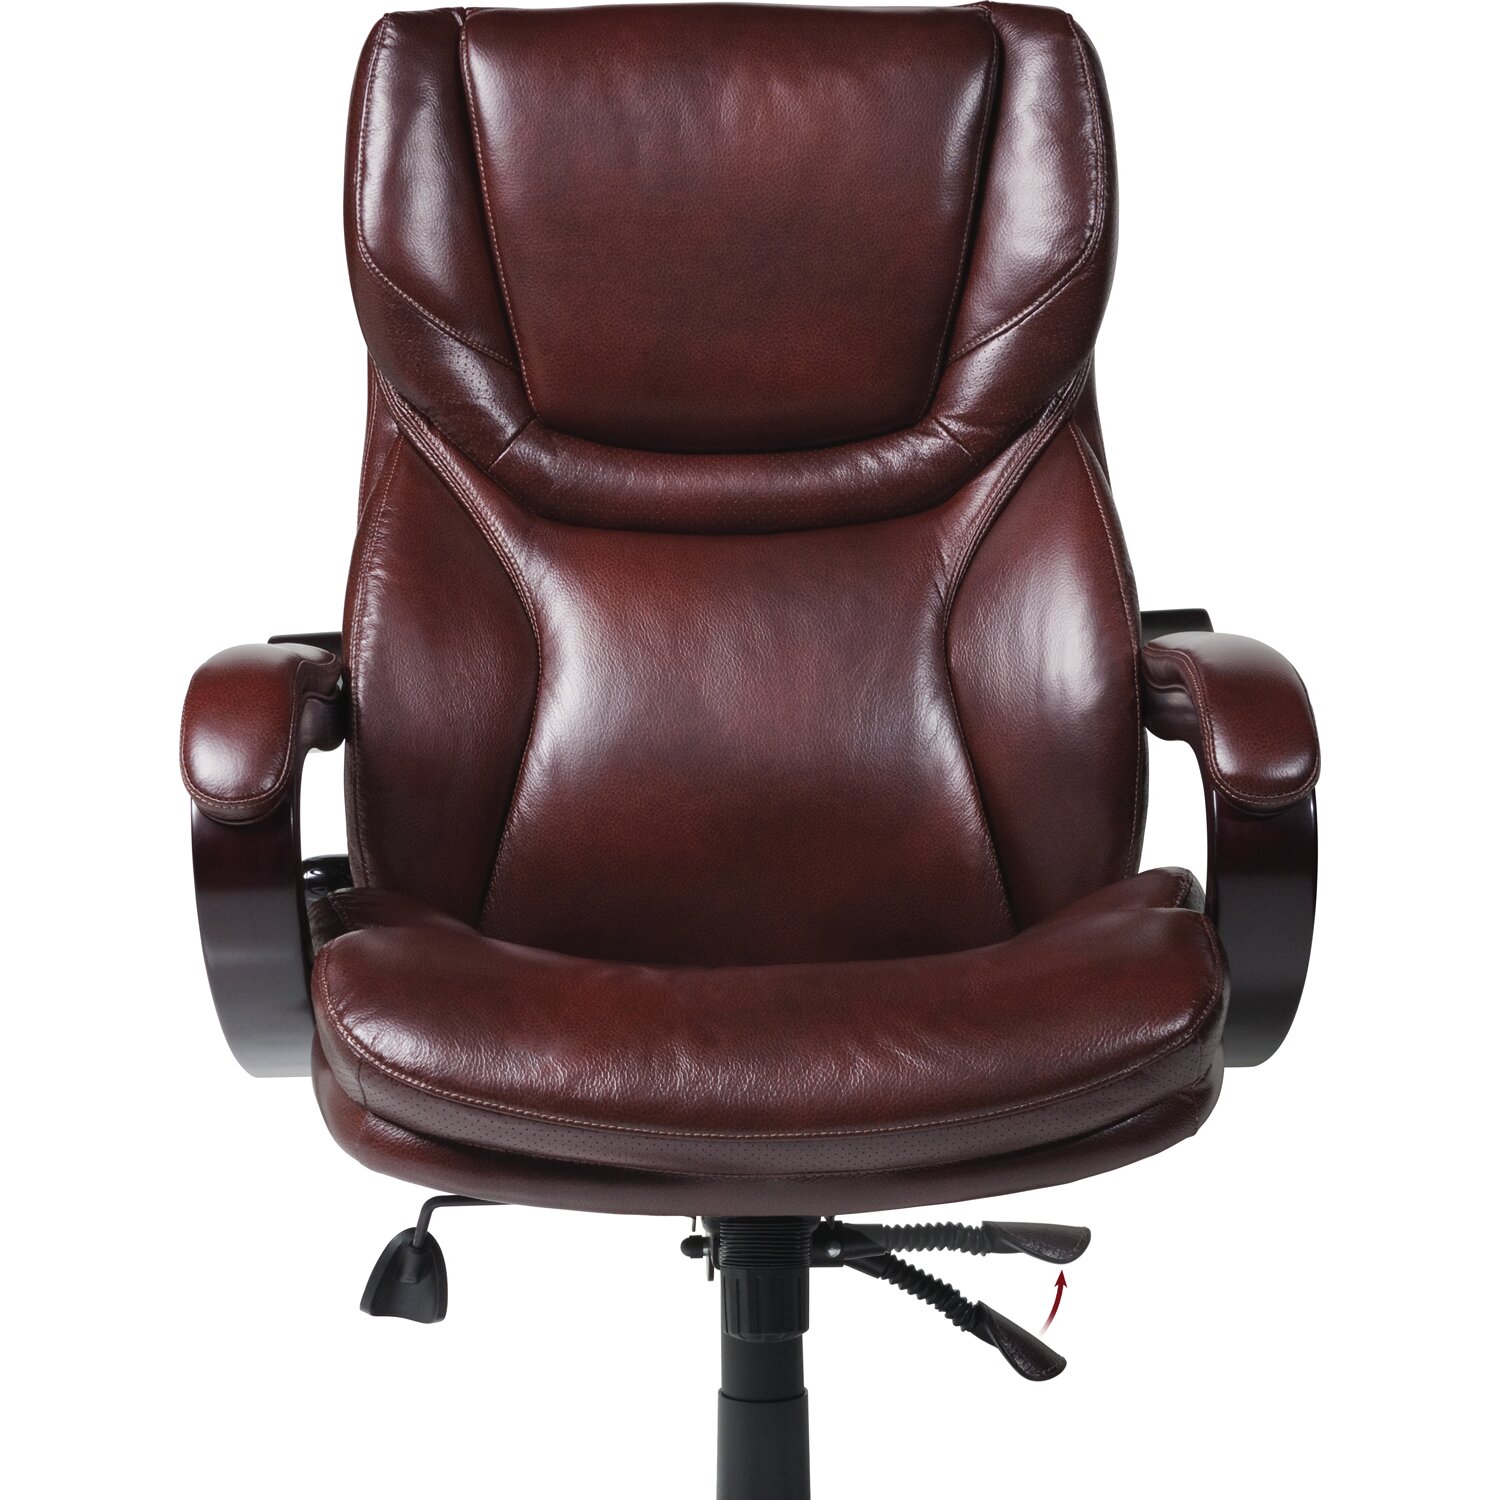 Serta At Home Big And Tall Executive Office Chair 43506 